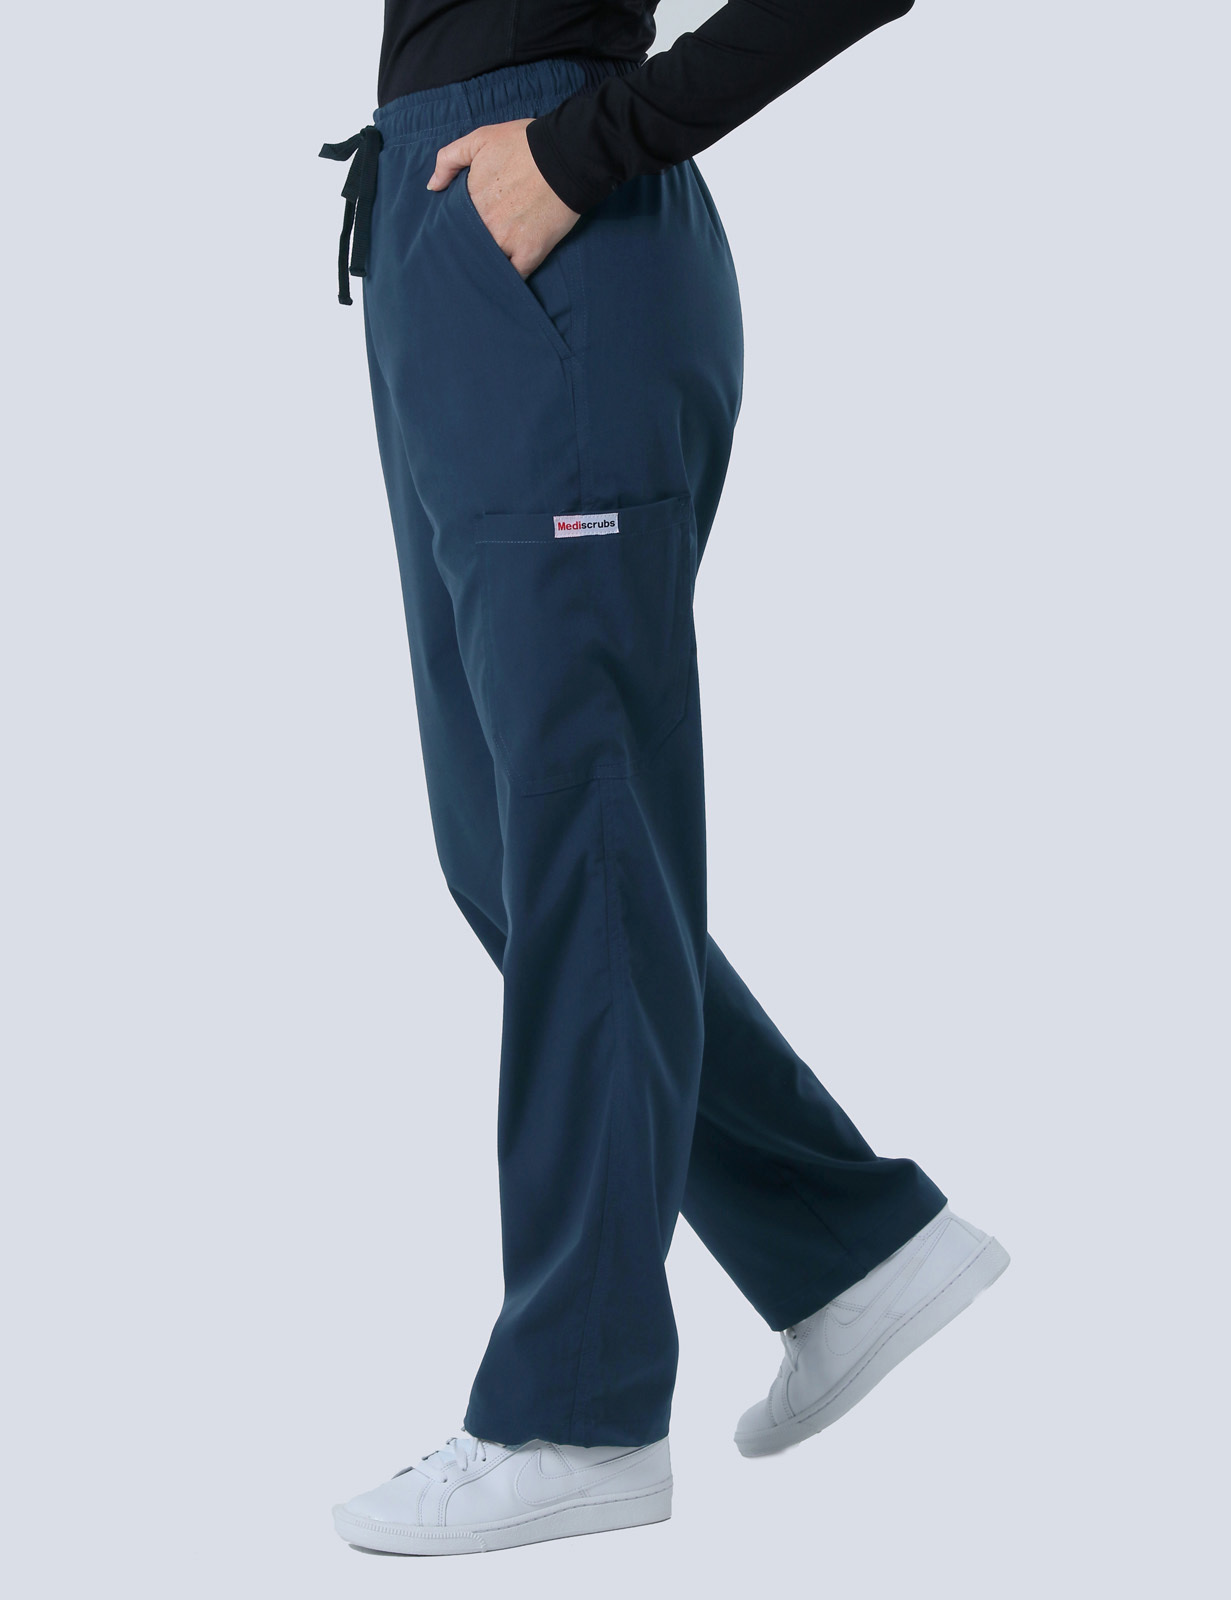 Regional Queensland Clinical Nurse Consultant (Women's Fit Solid Top and Cargo Pants in Navy incl Logos) 